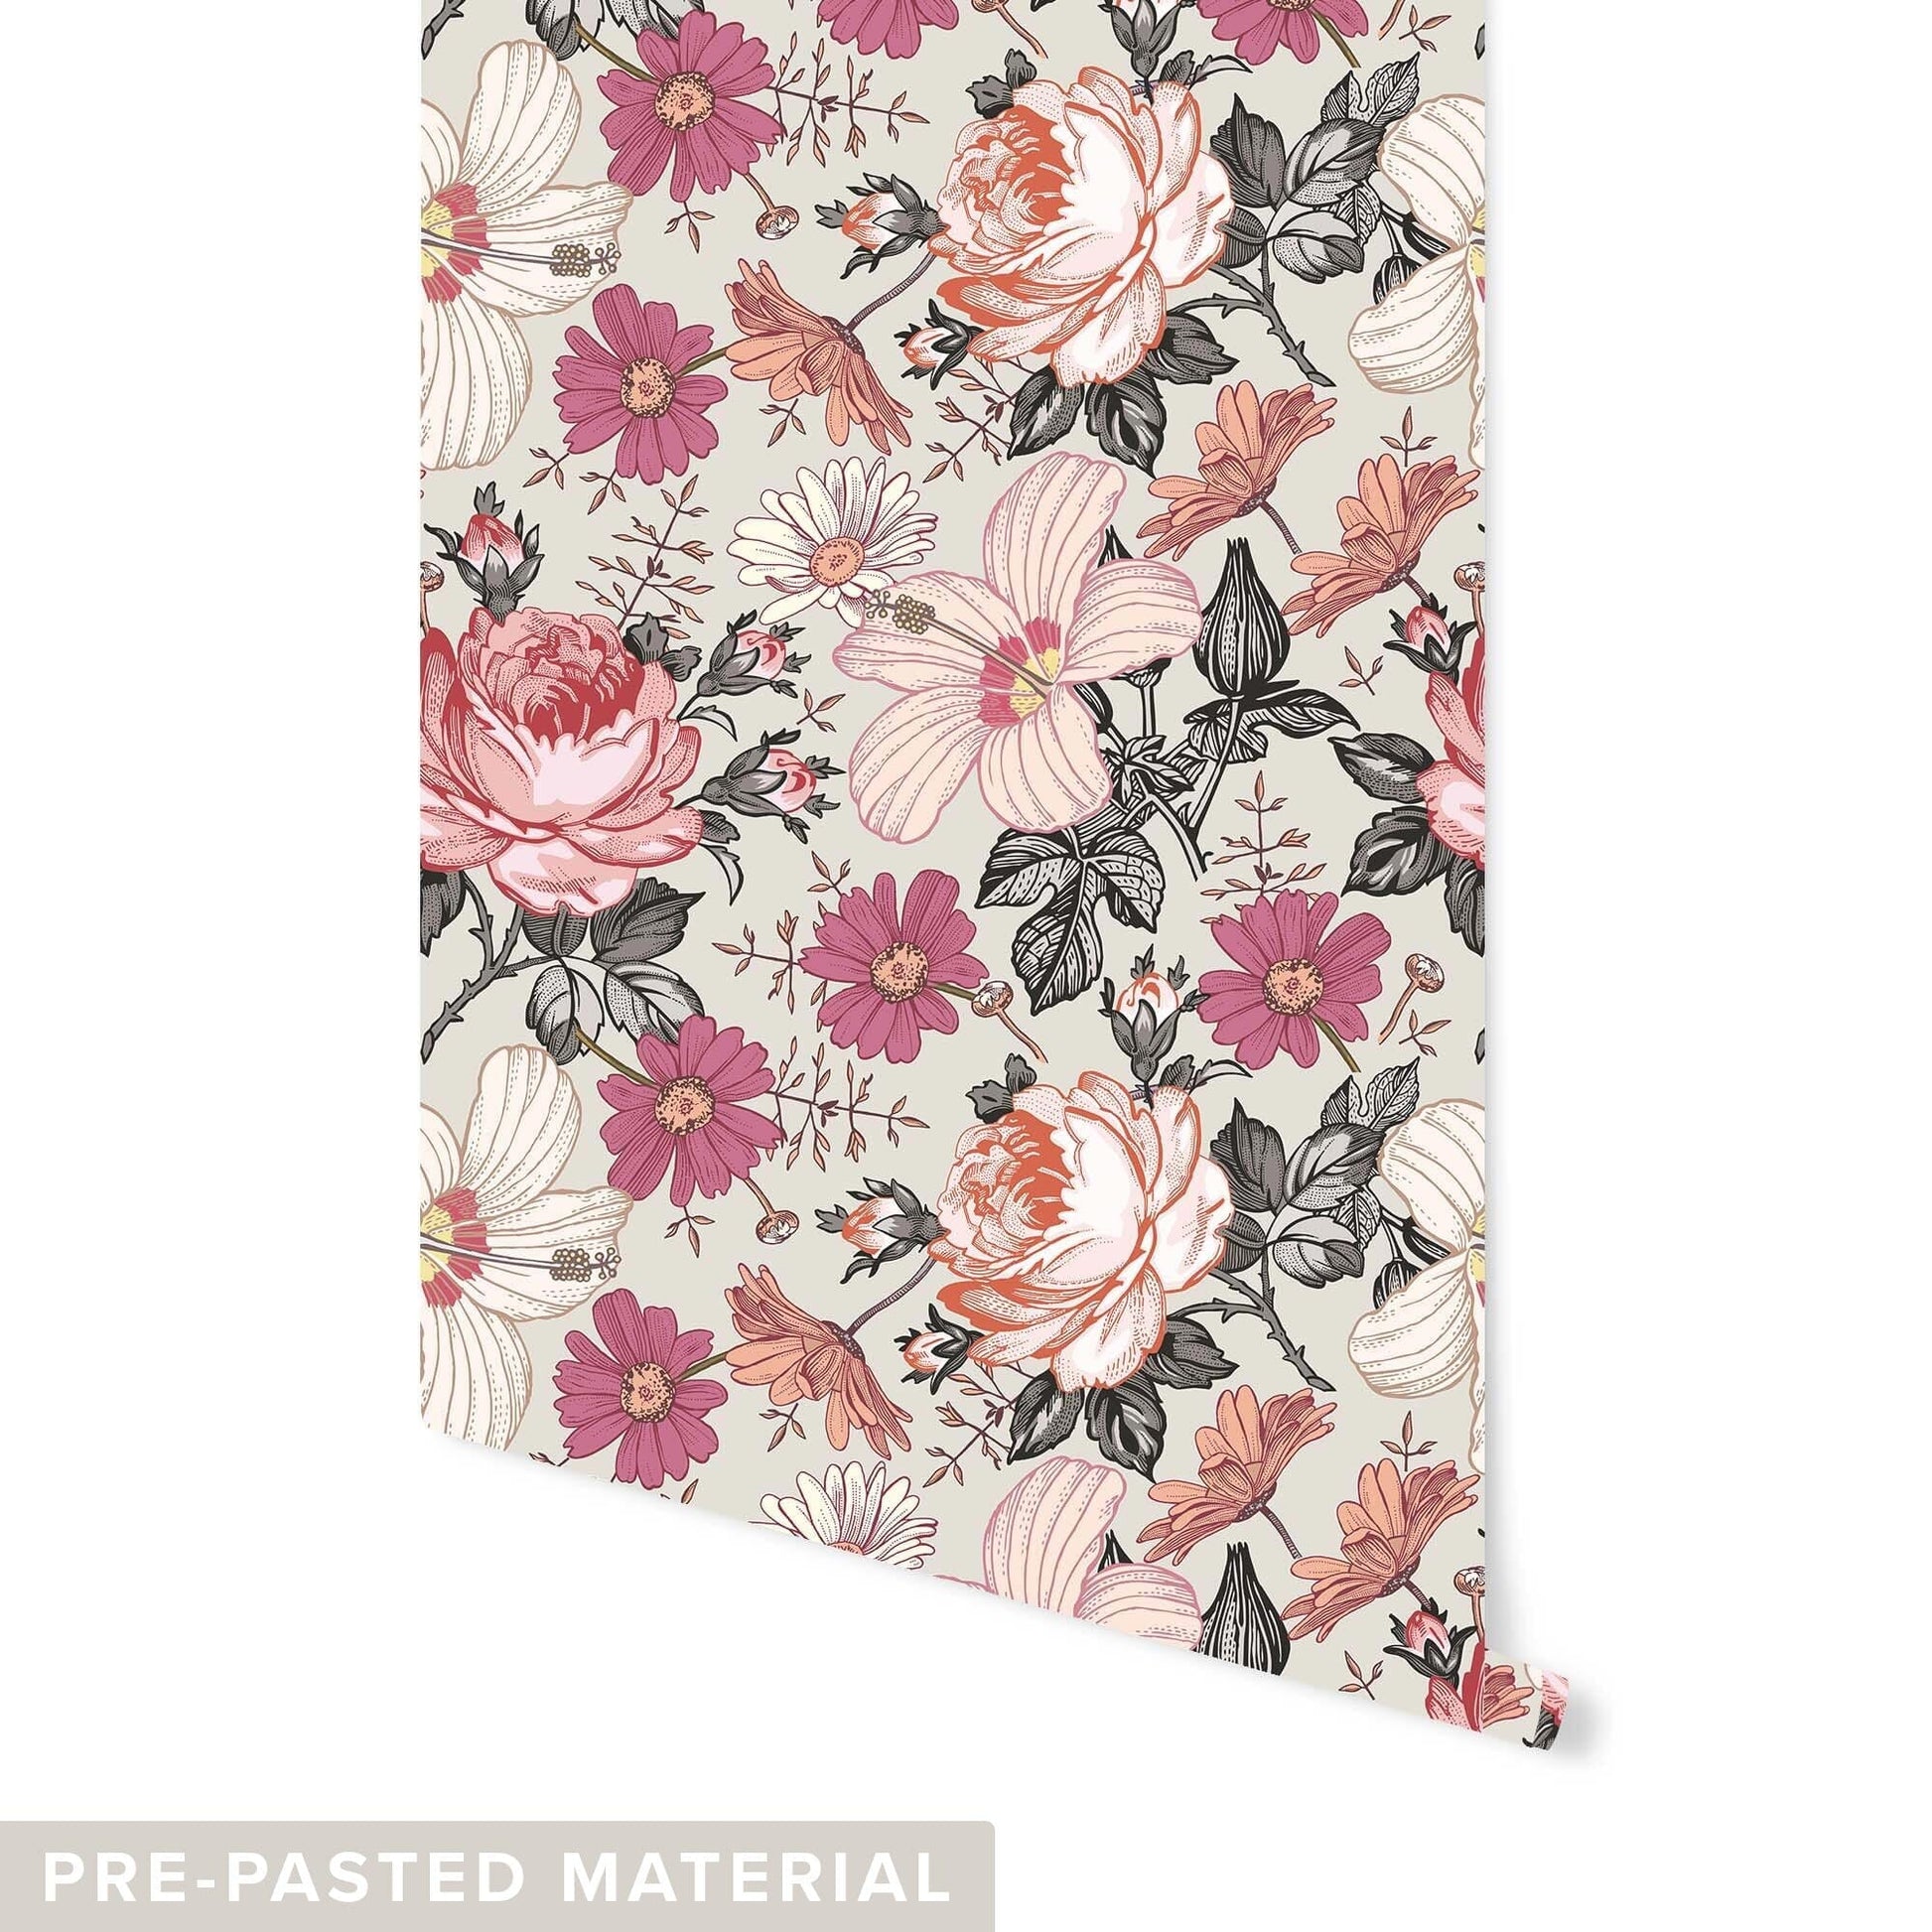 Prairie Floral Wallpaper Wallpaper Urbanwalls Pre-pasted DOUBLE ROLL : 46" X 4 FEET Rose